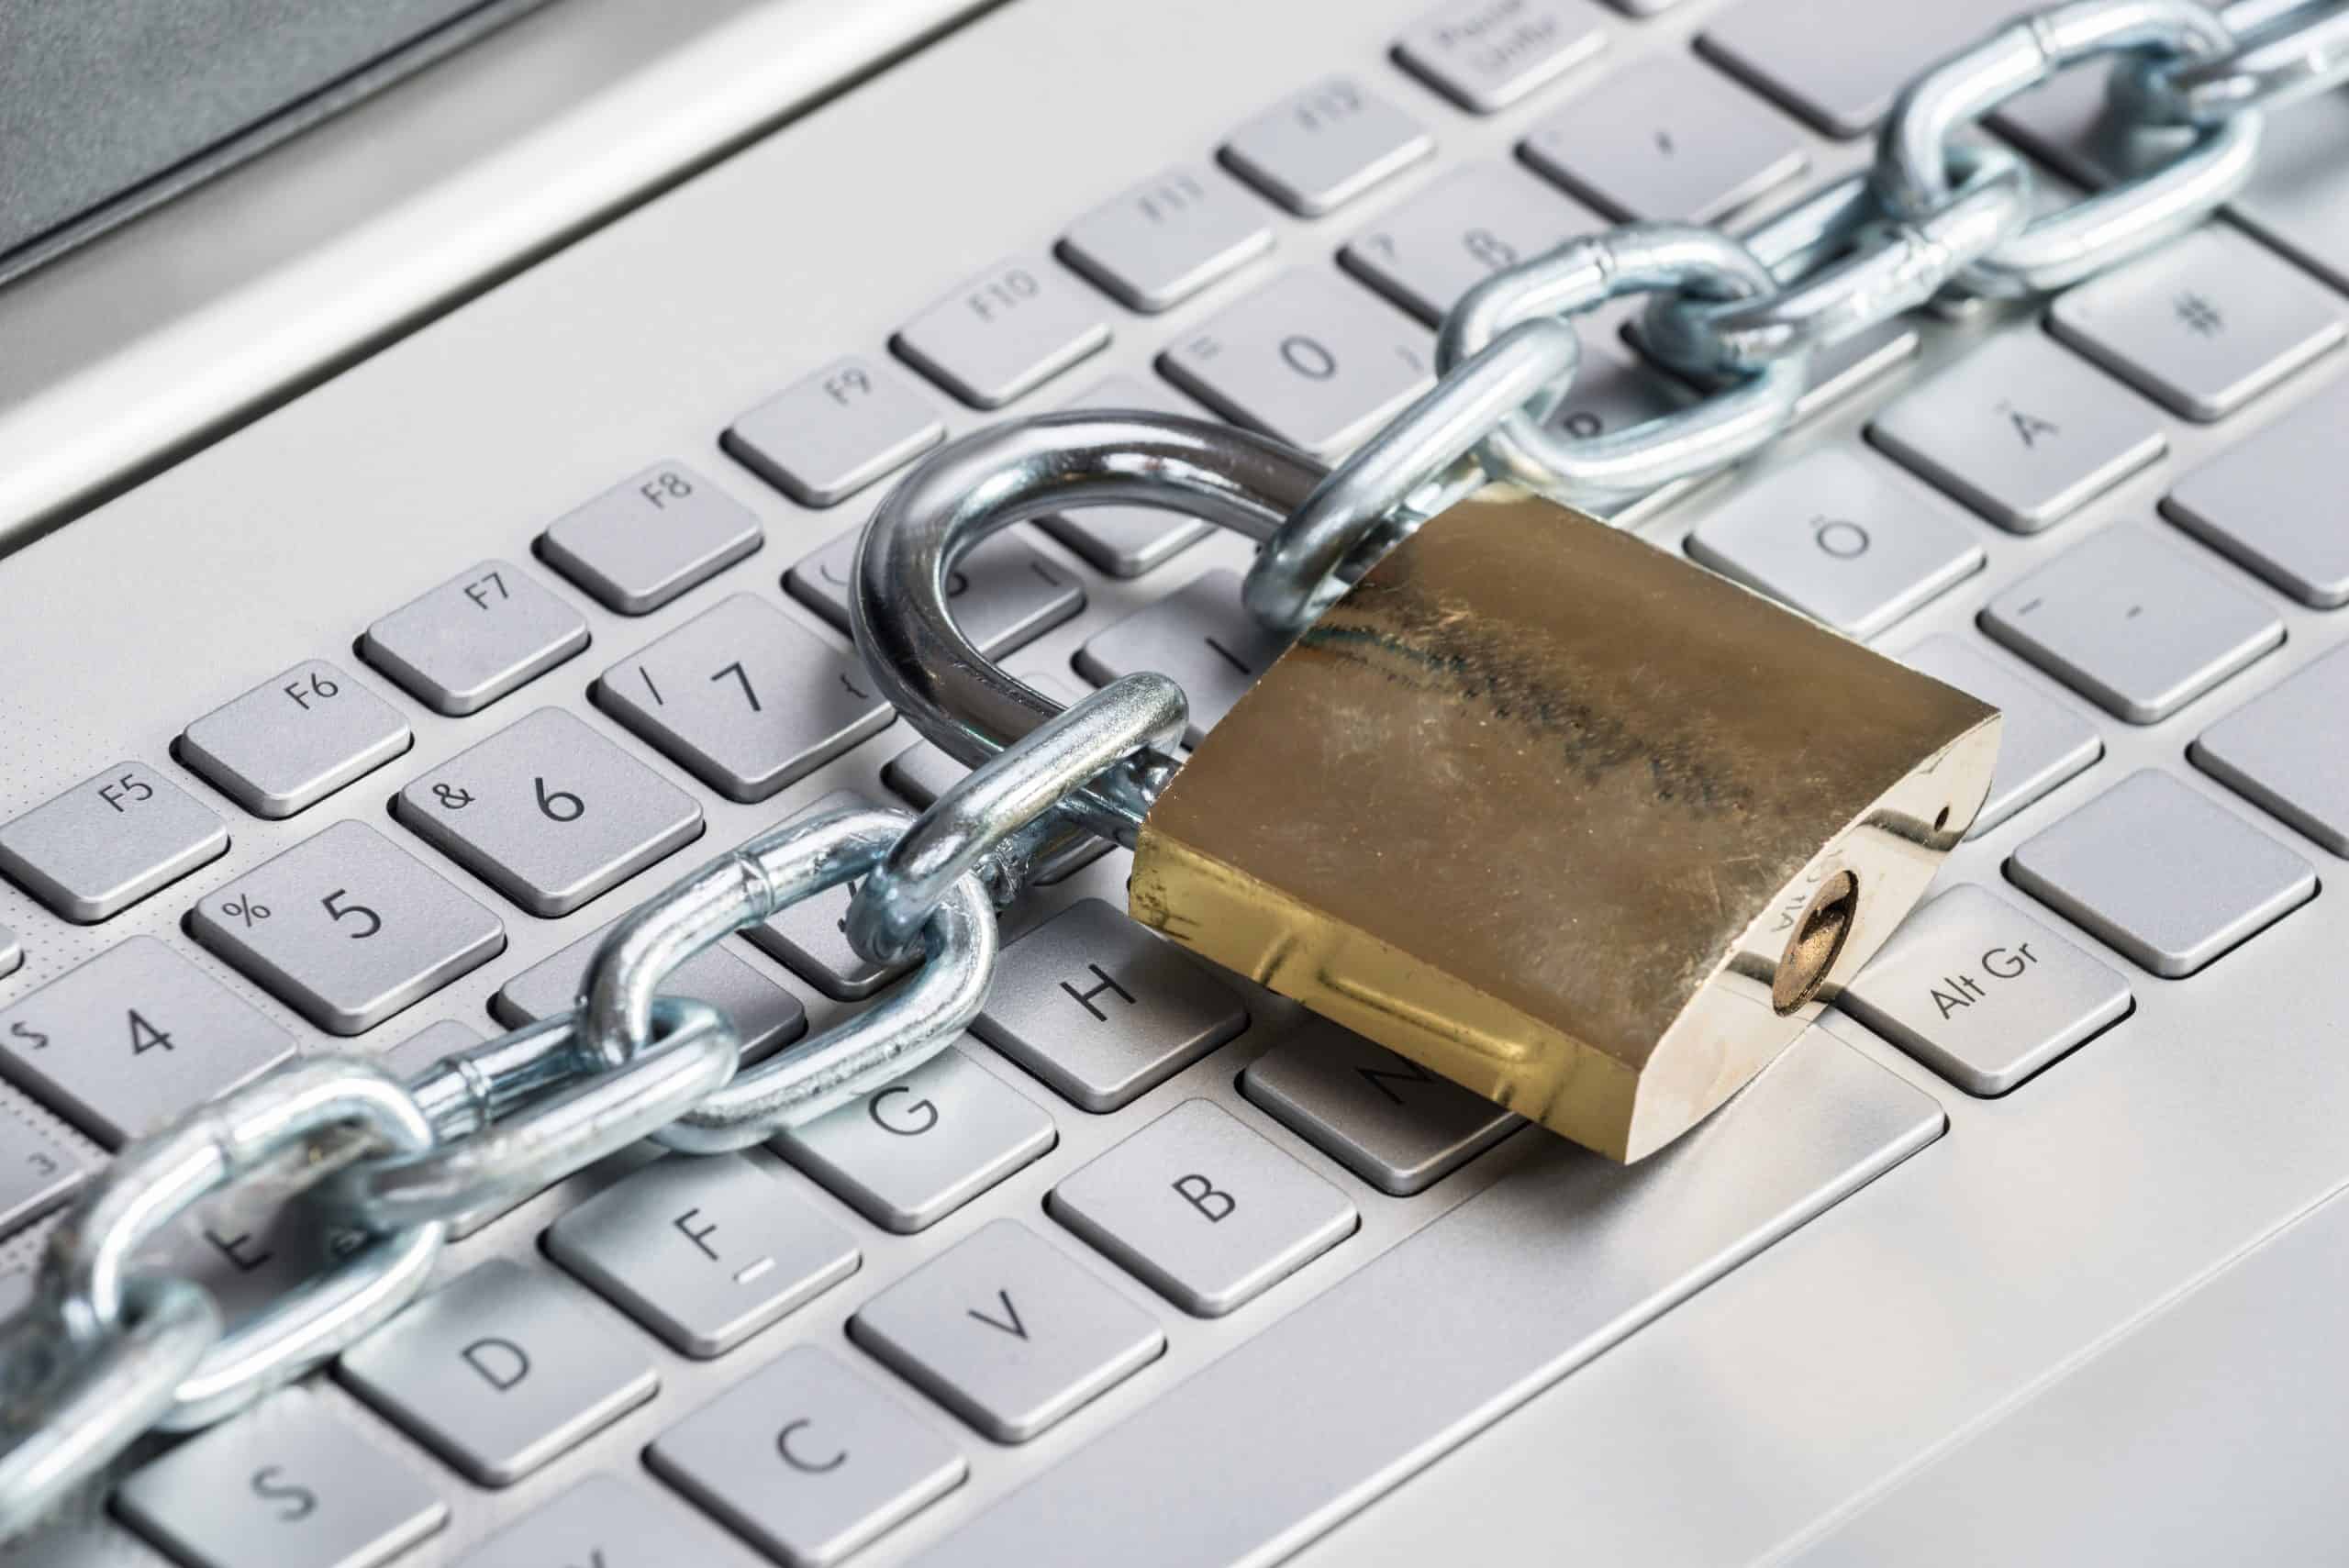 Padlock and chain on laptop